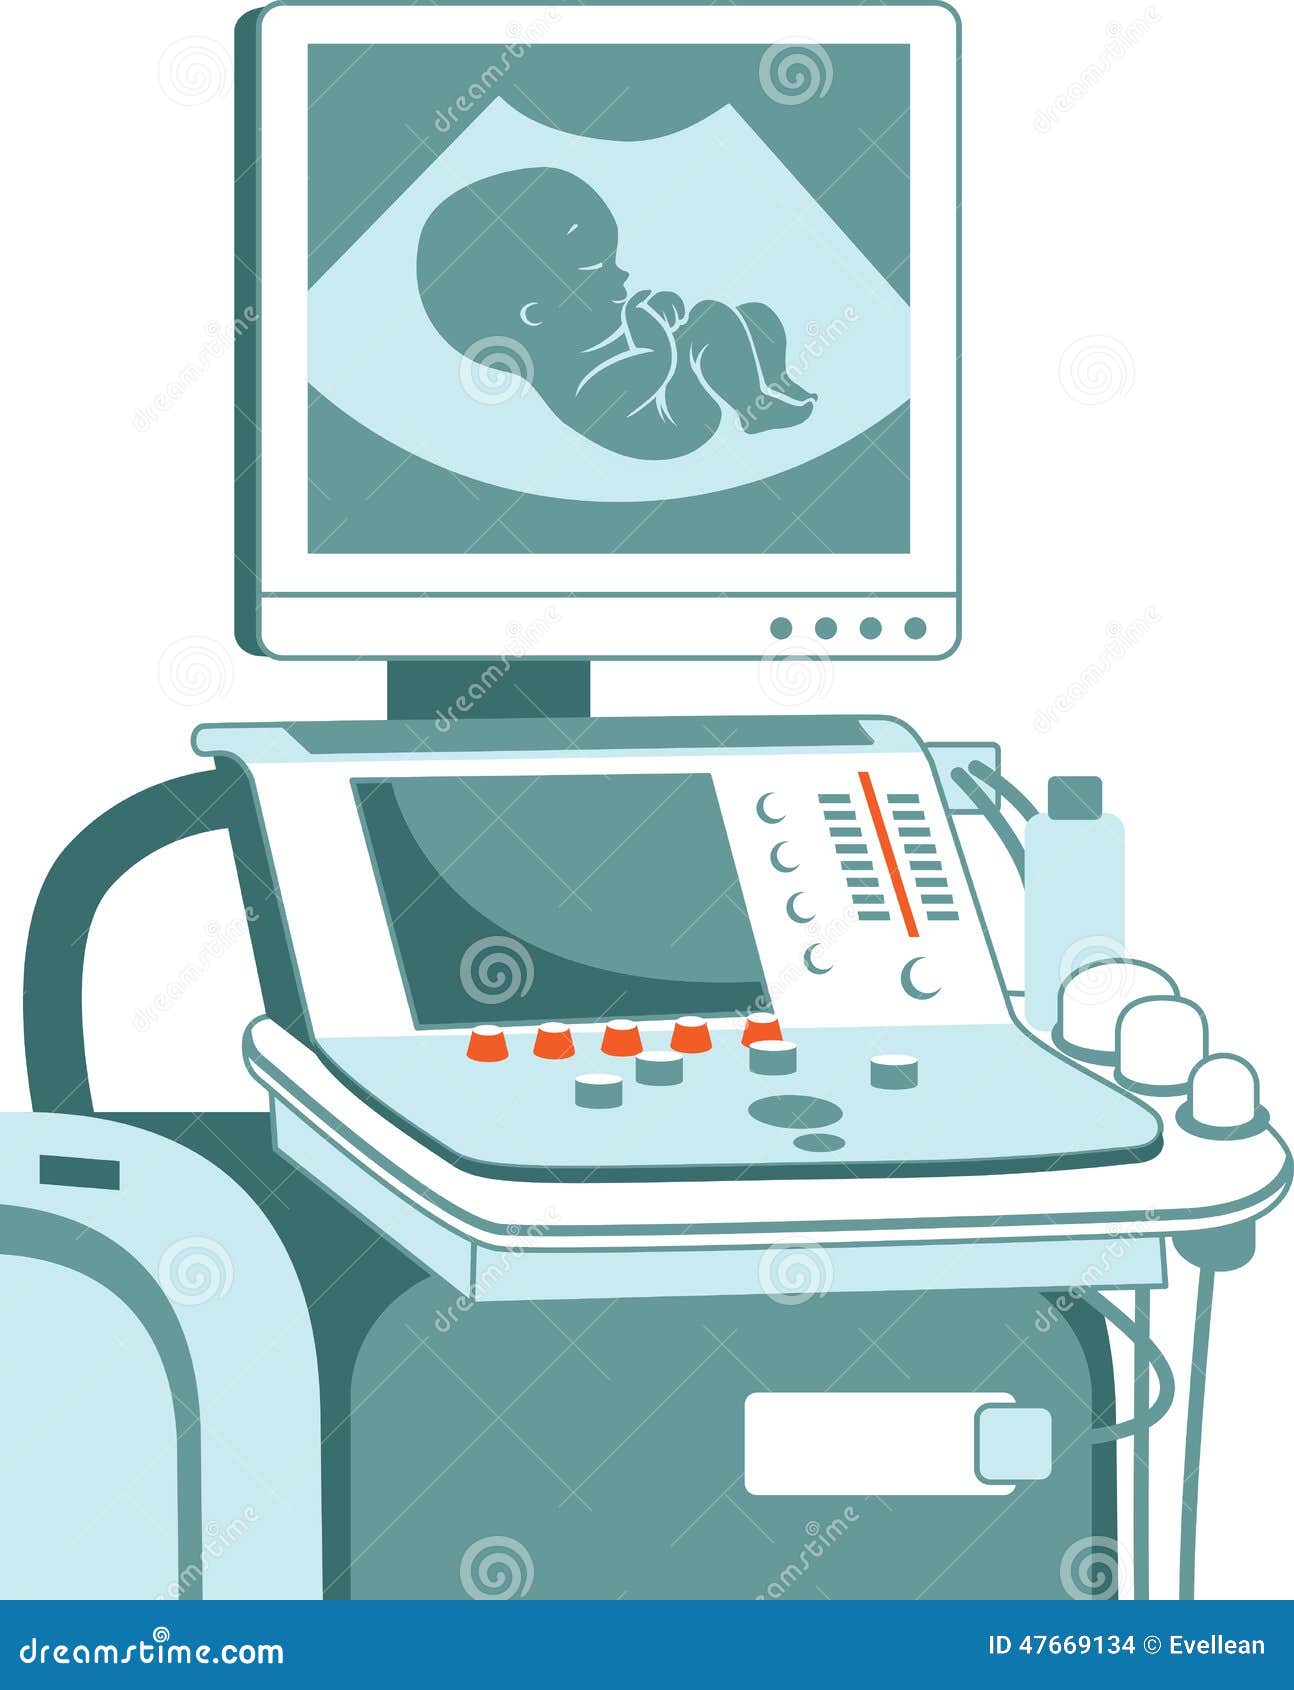 baby ultrasound clipart - photo #45